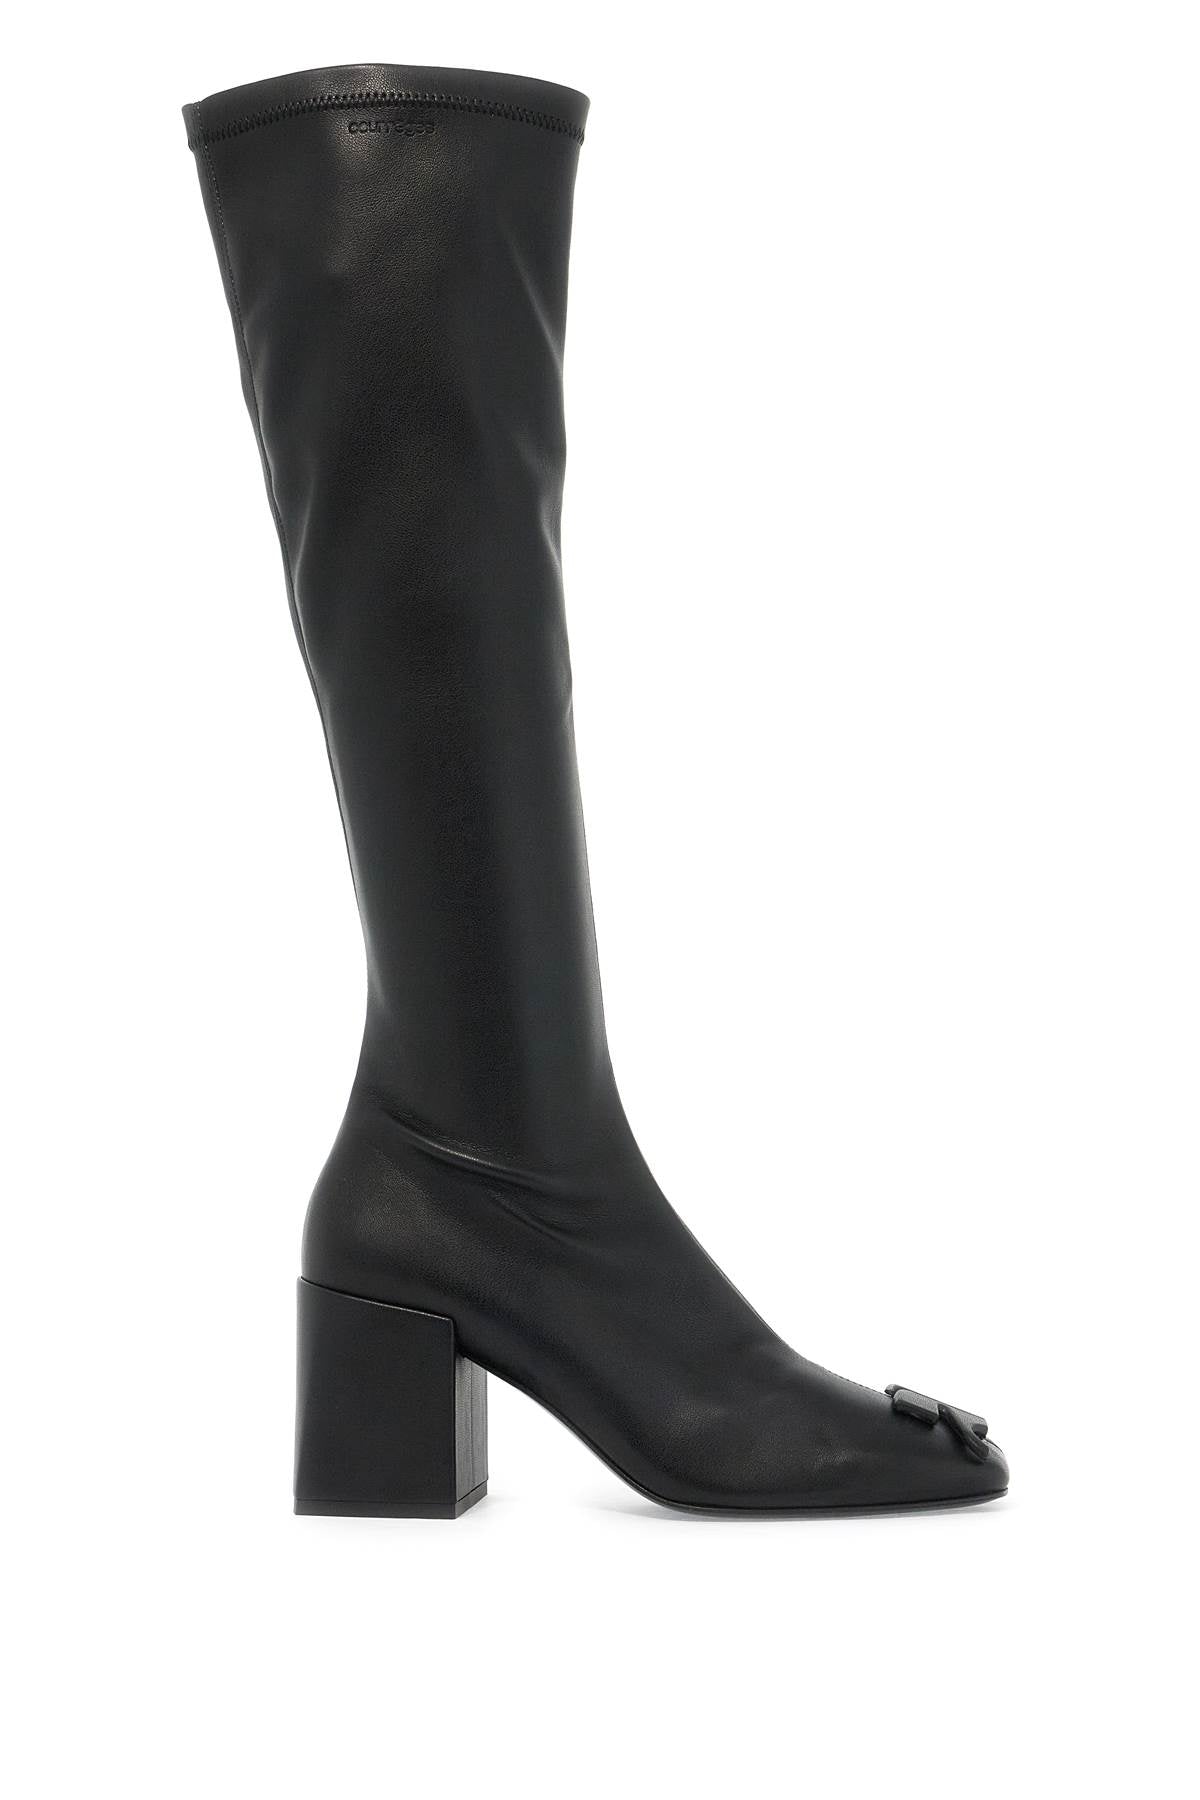 Courreges stretch reedition eco-leather boots